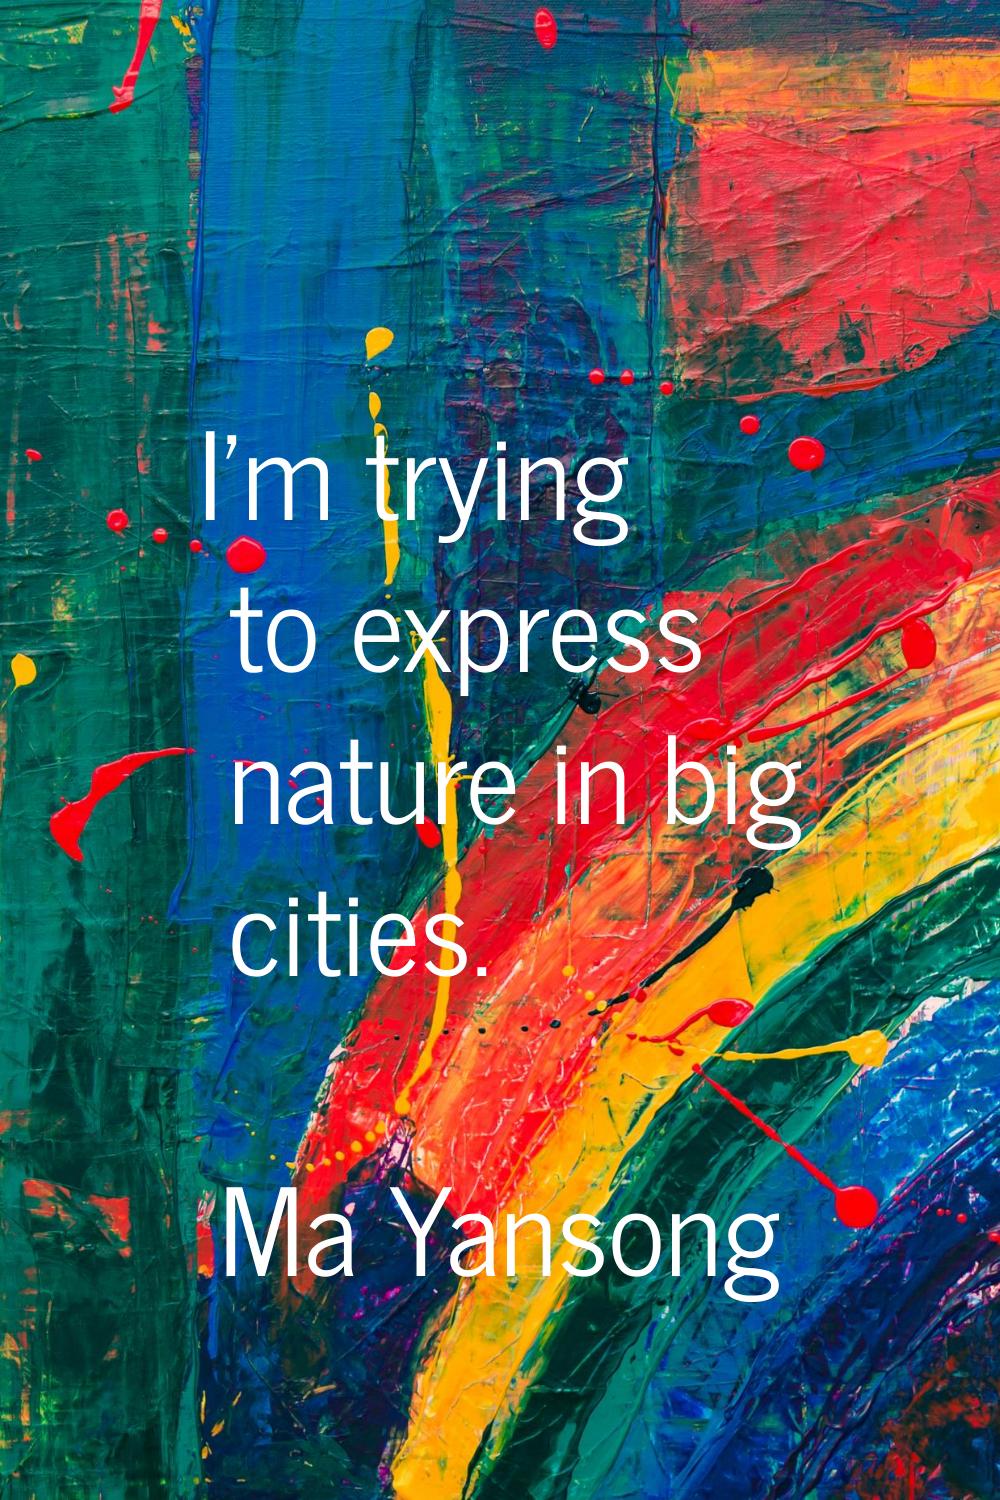 I'm trying to express nature in big cities.